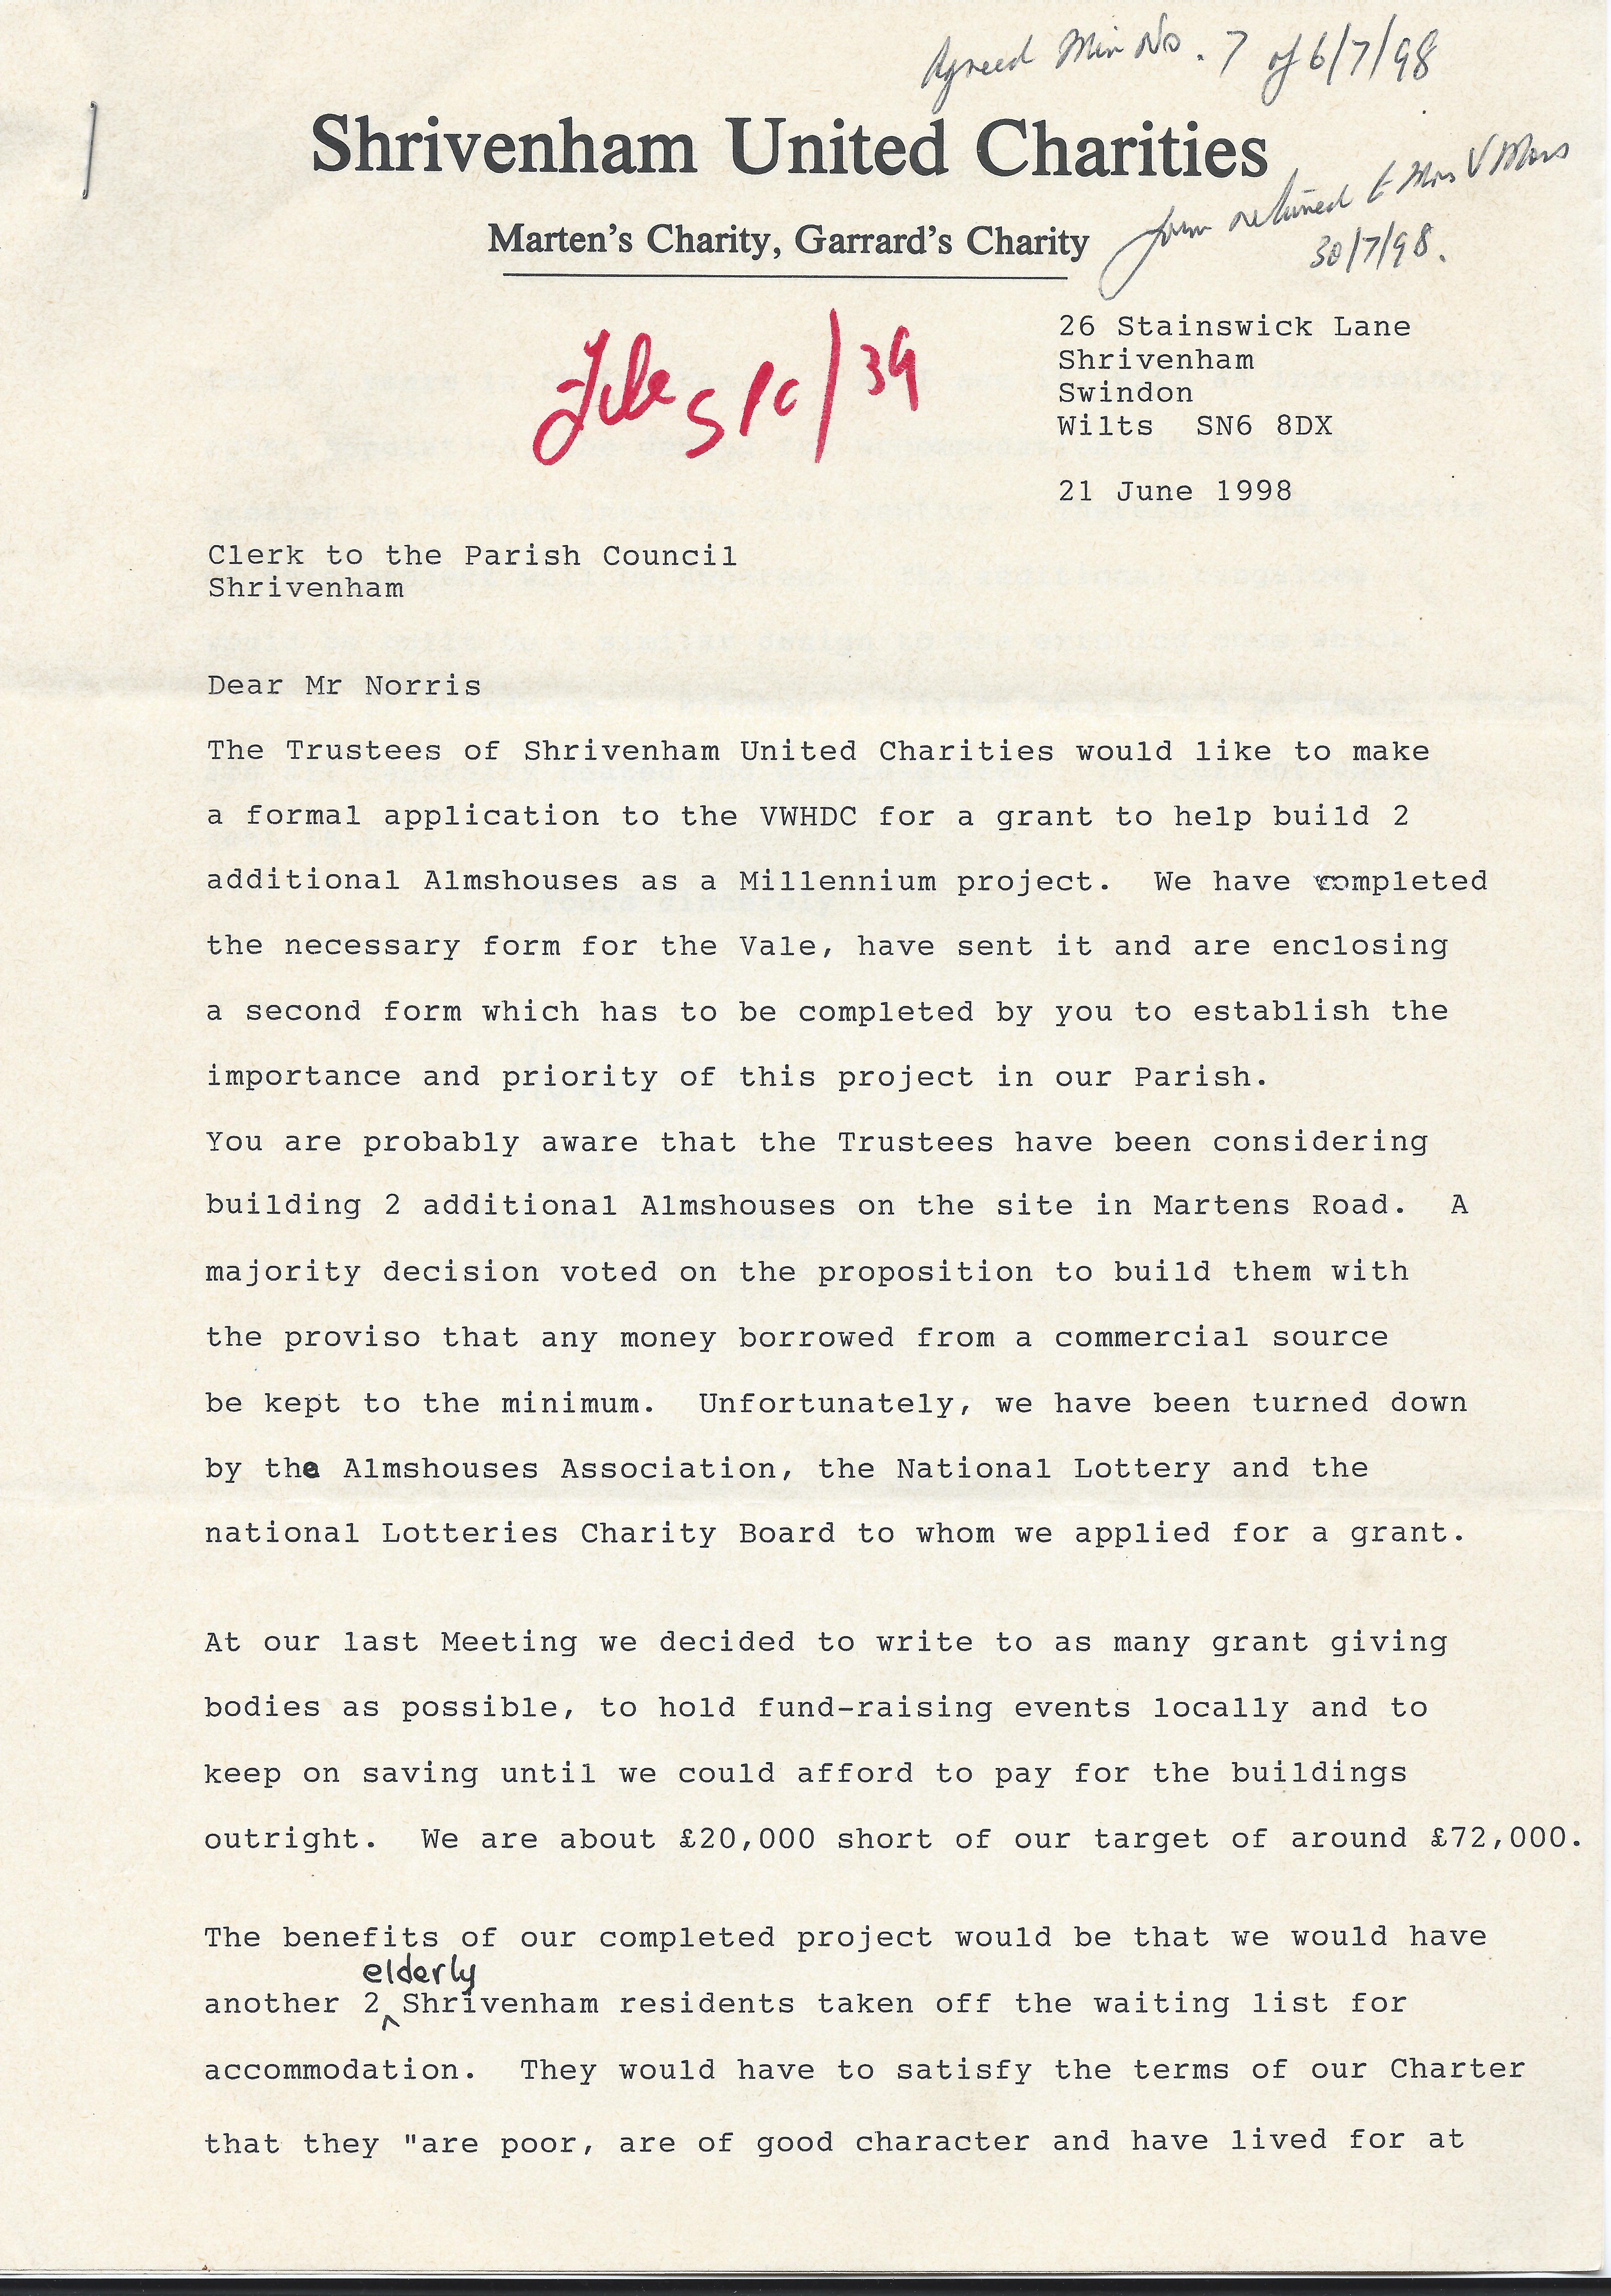 A typical letter from the file